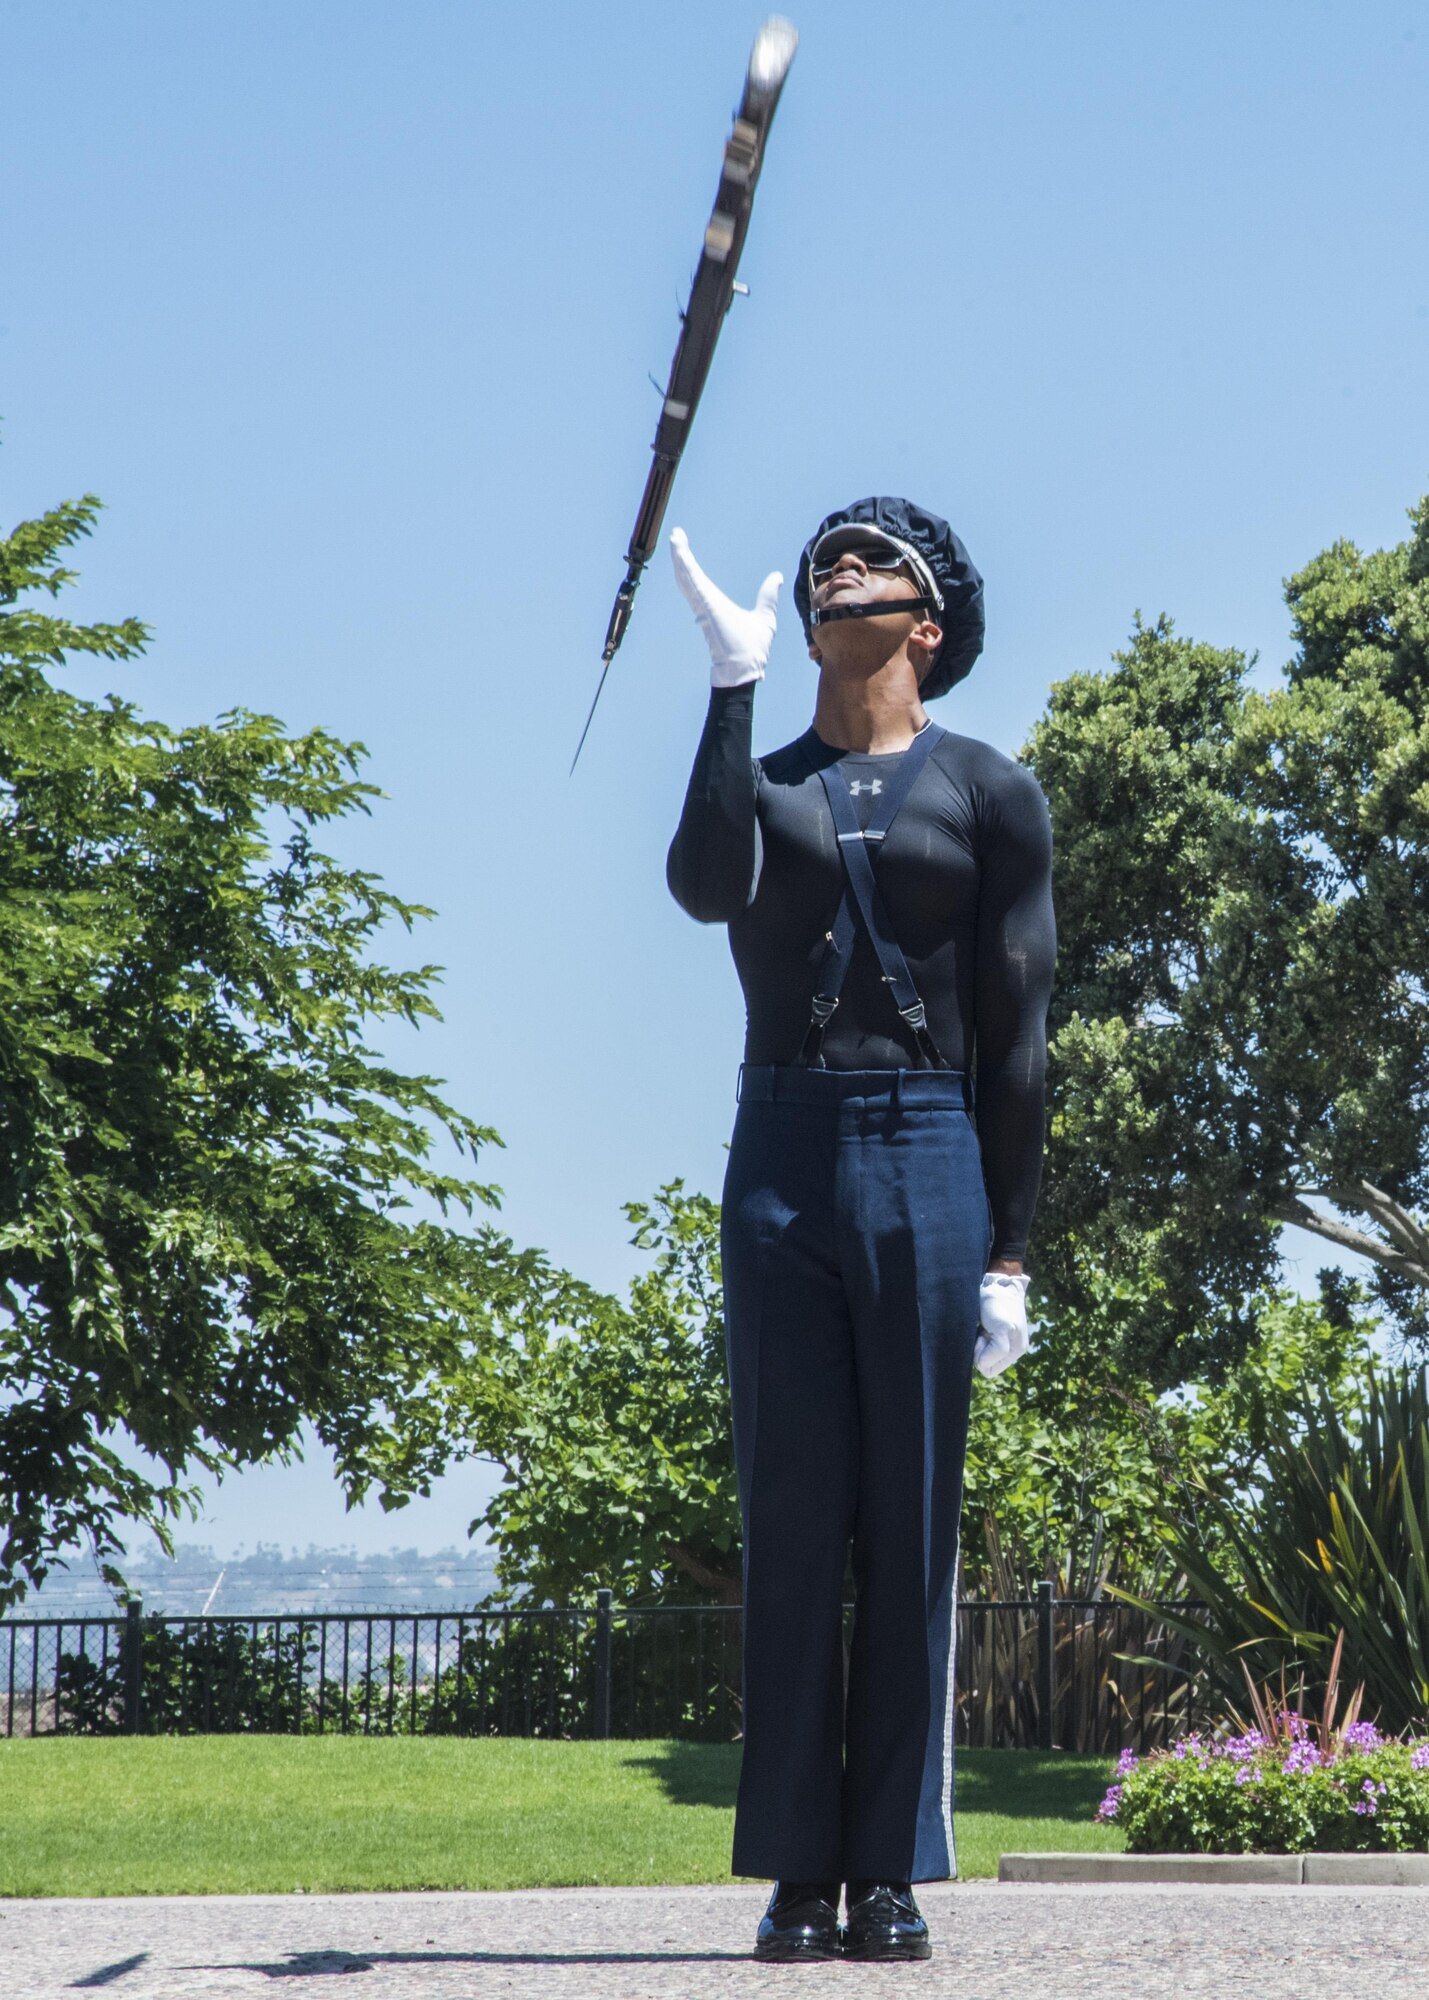 Airman 1st Class Tyrell Hall, U.S. Air Force Honor Guard Drill Team member, practices a rifle maneuver prior to a performance at Sea World in San Diego, Ca., June 27, 2017. To perform professionally choreographed sequences of weapon maneuvers, drill team members must attend an eight-week course as well as repeatedly practicing each routine. (U.S. Air Force photo by Senior Airman Jordyn Fetter)